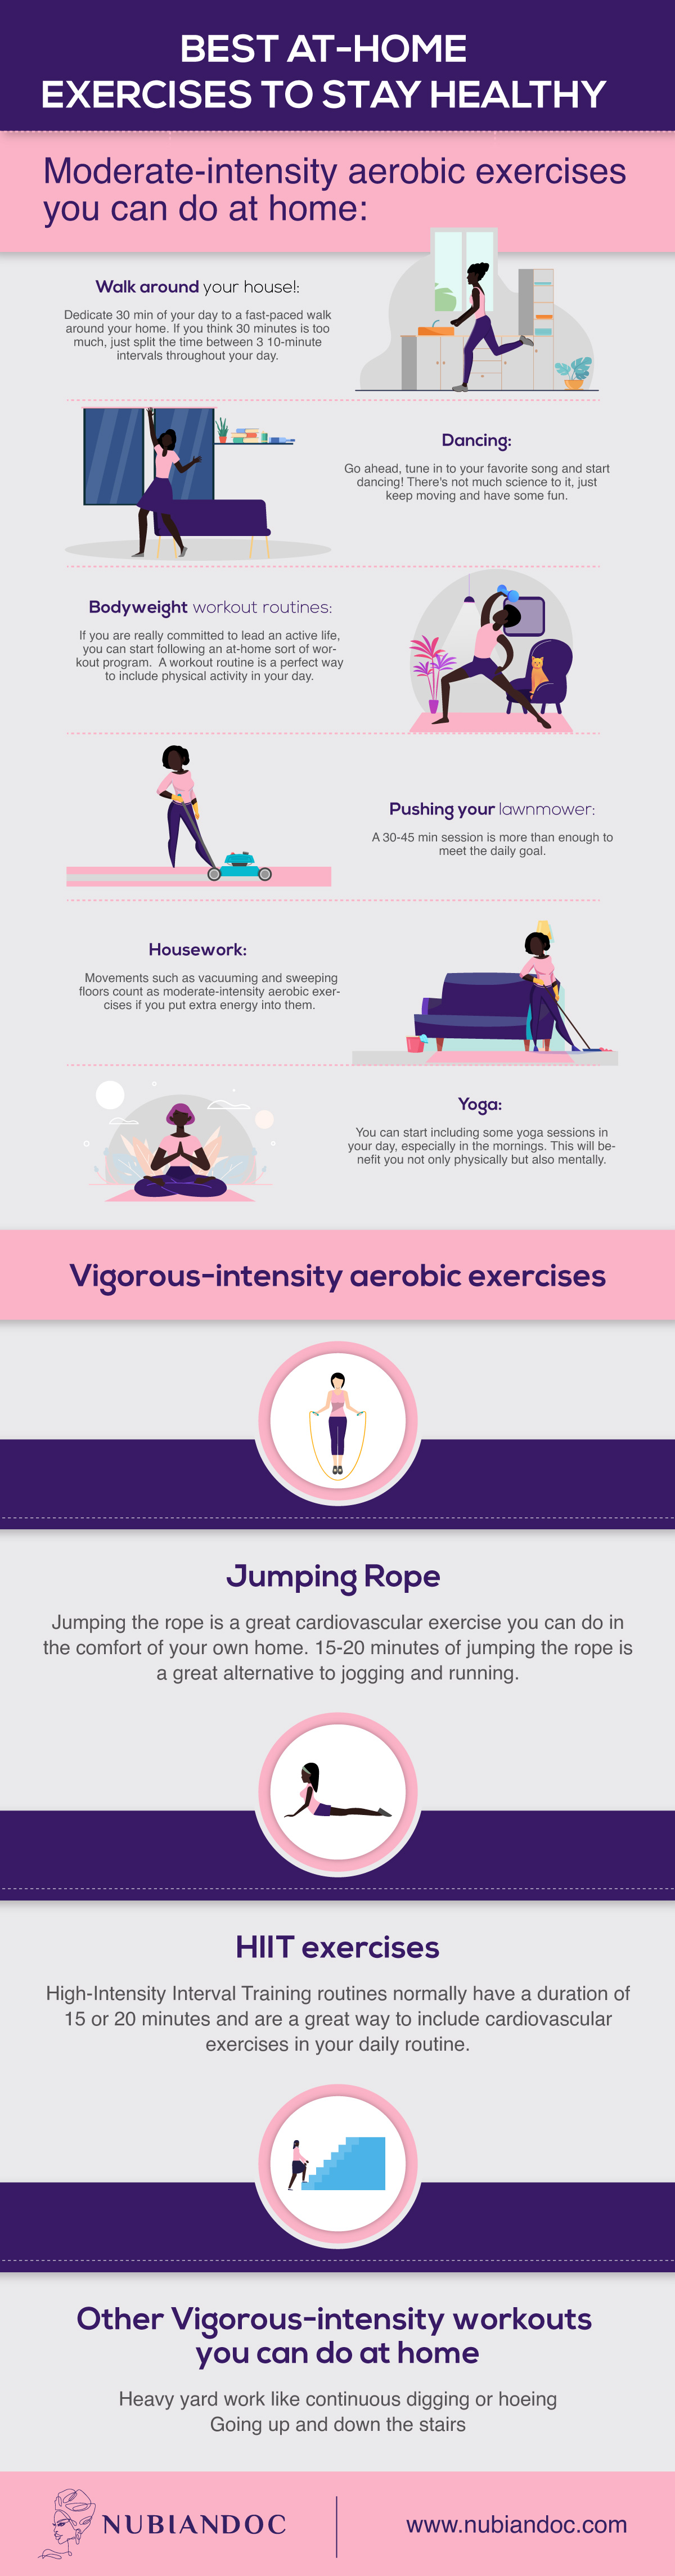 At-home exercises to stay healthy 